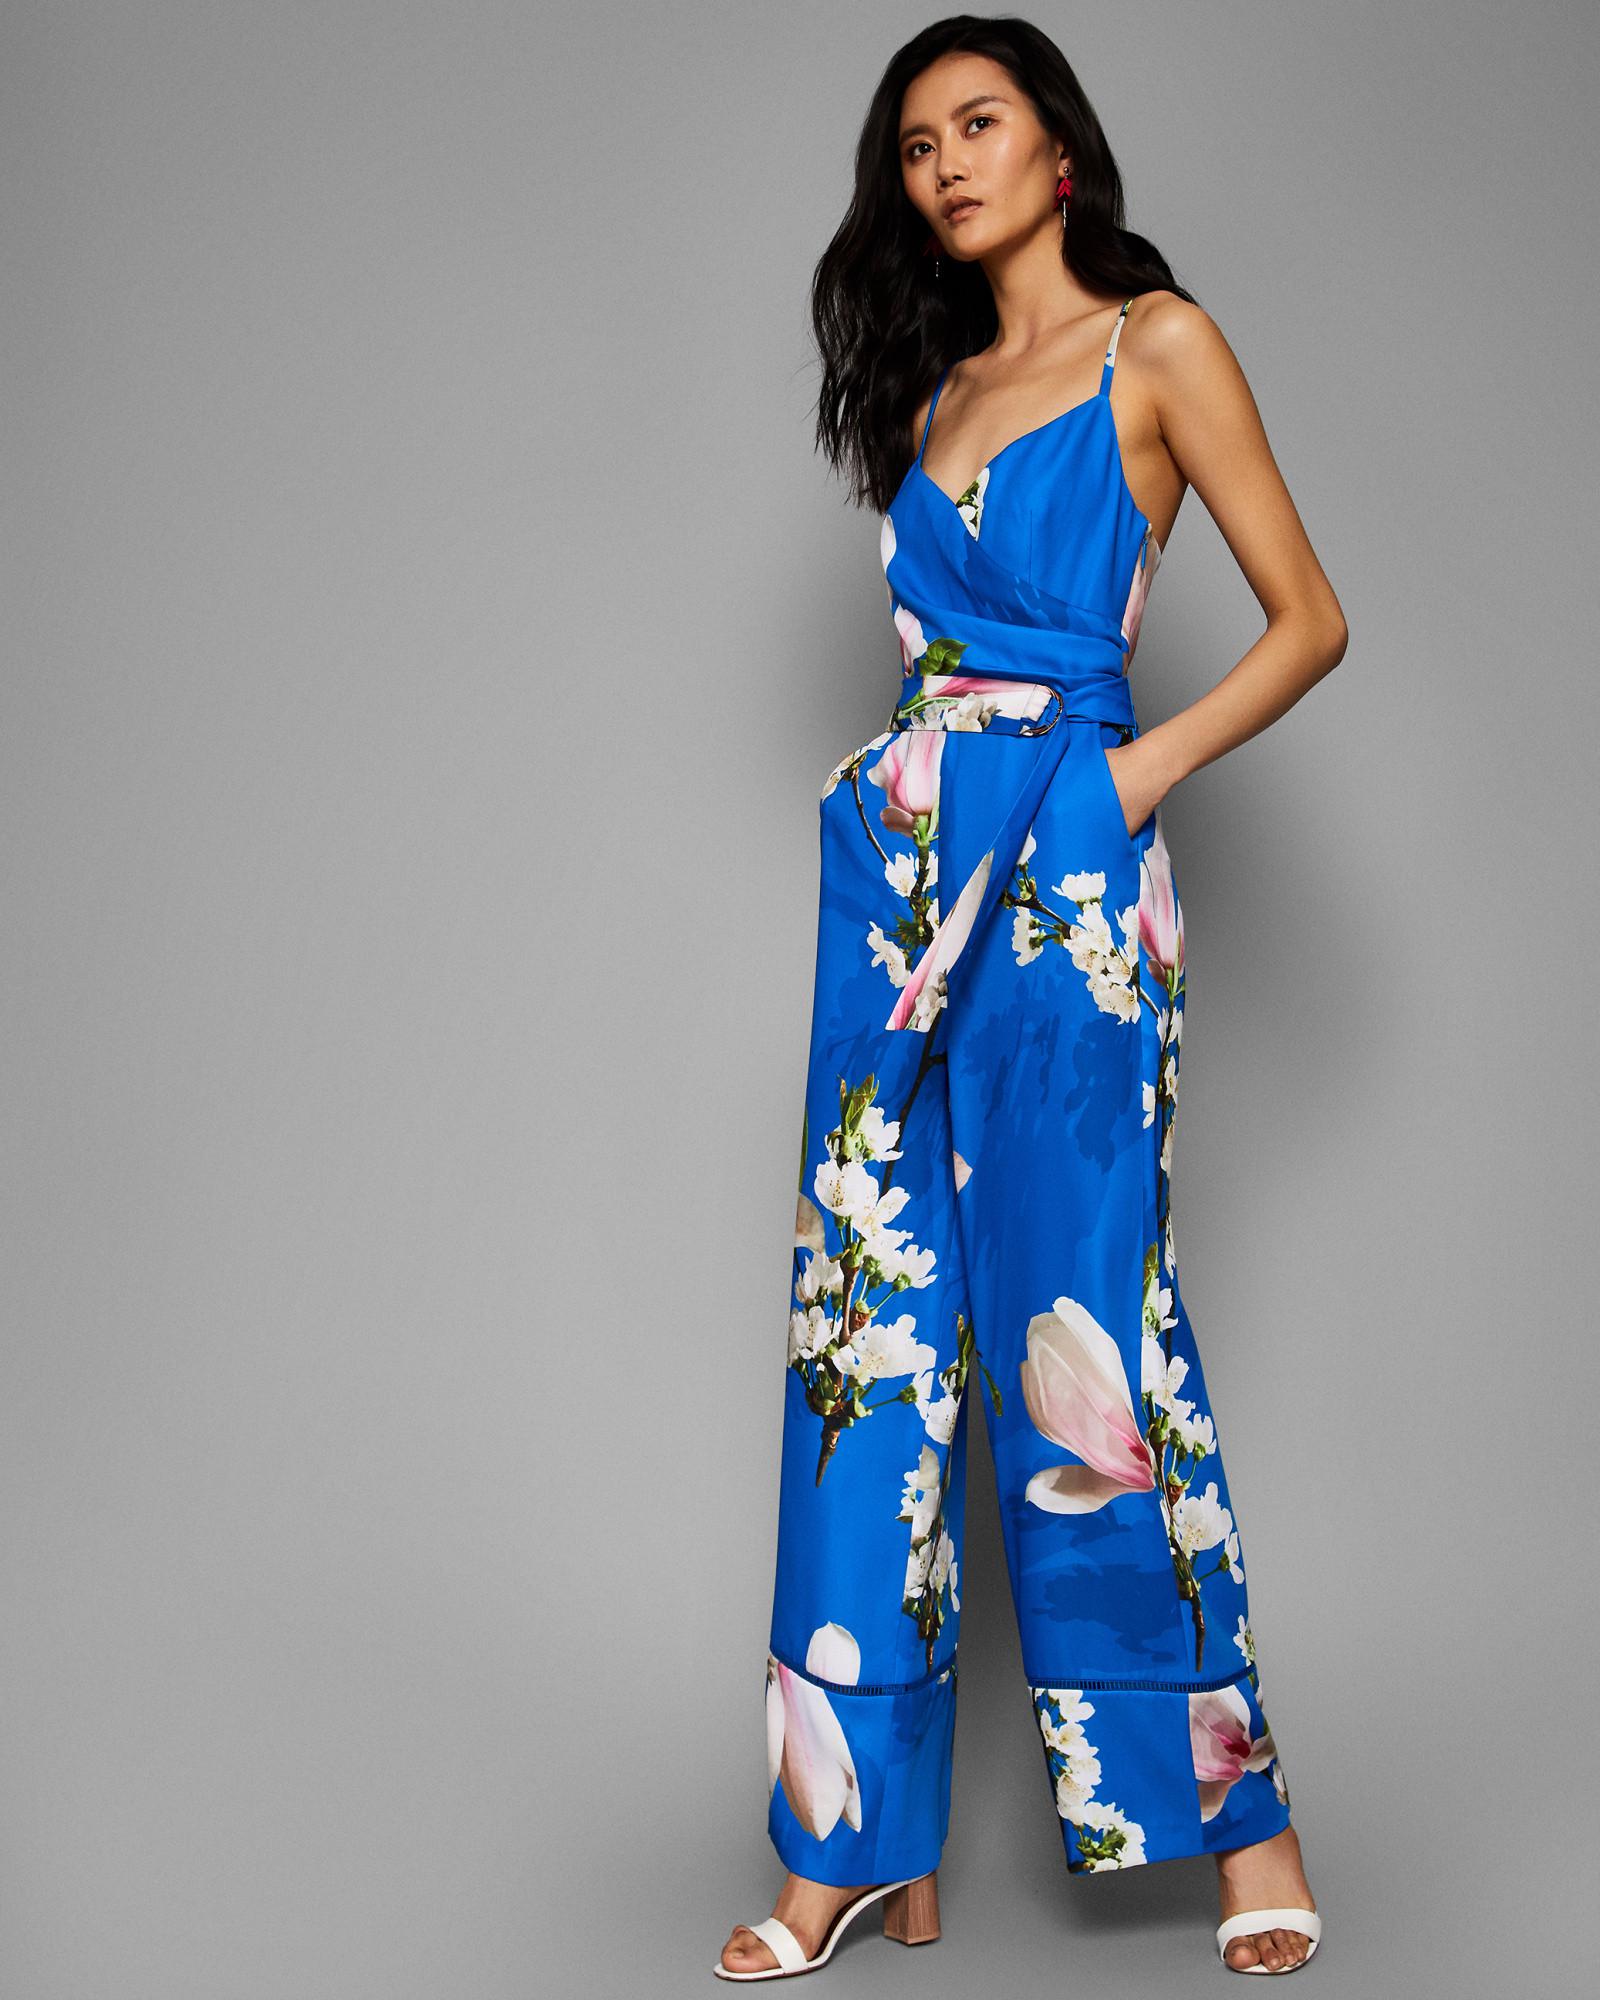 axe Now Atticus ted baker jumpsuit floral Investigation entry pepper